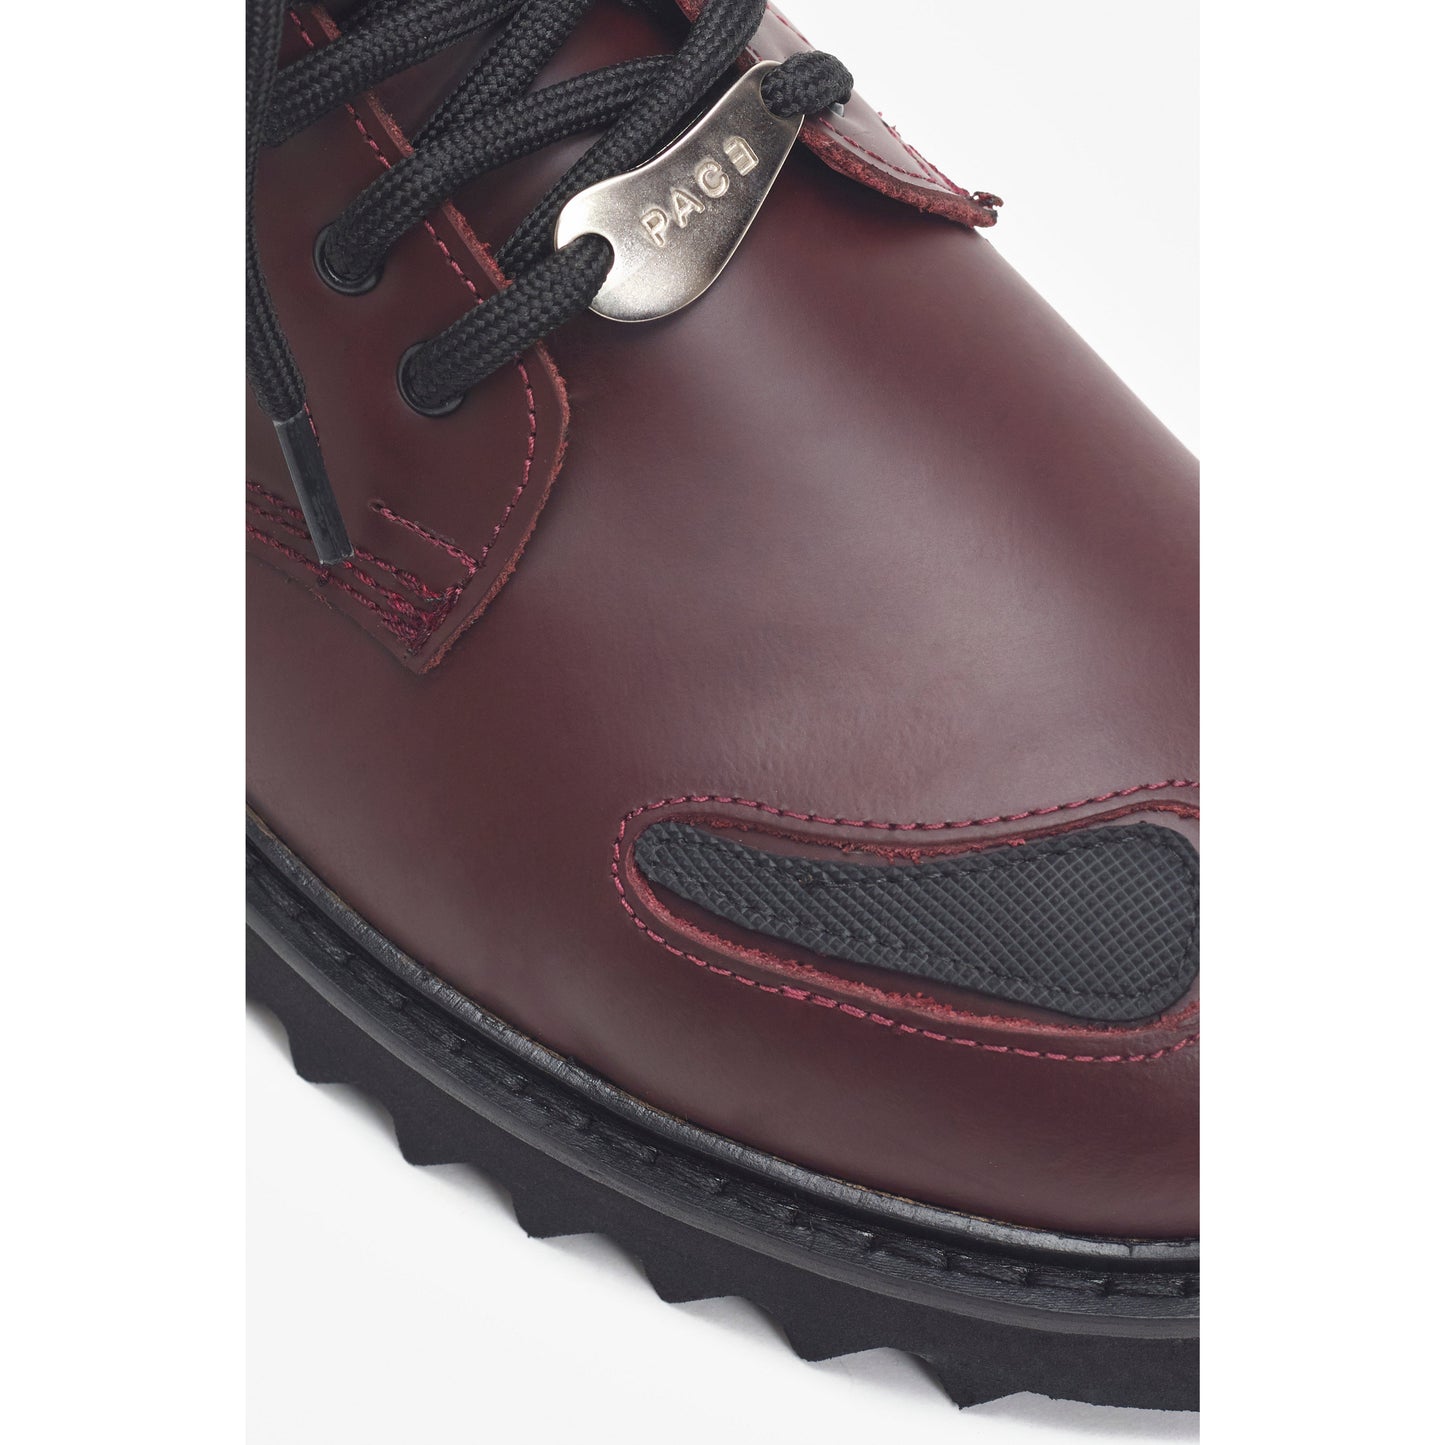 PACE - Tomo Rubber Boots "Burgundy" - THE GAME